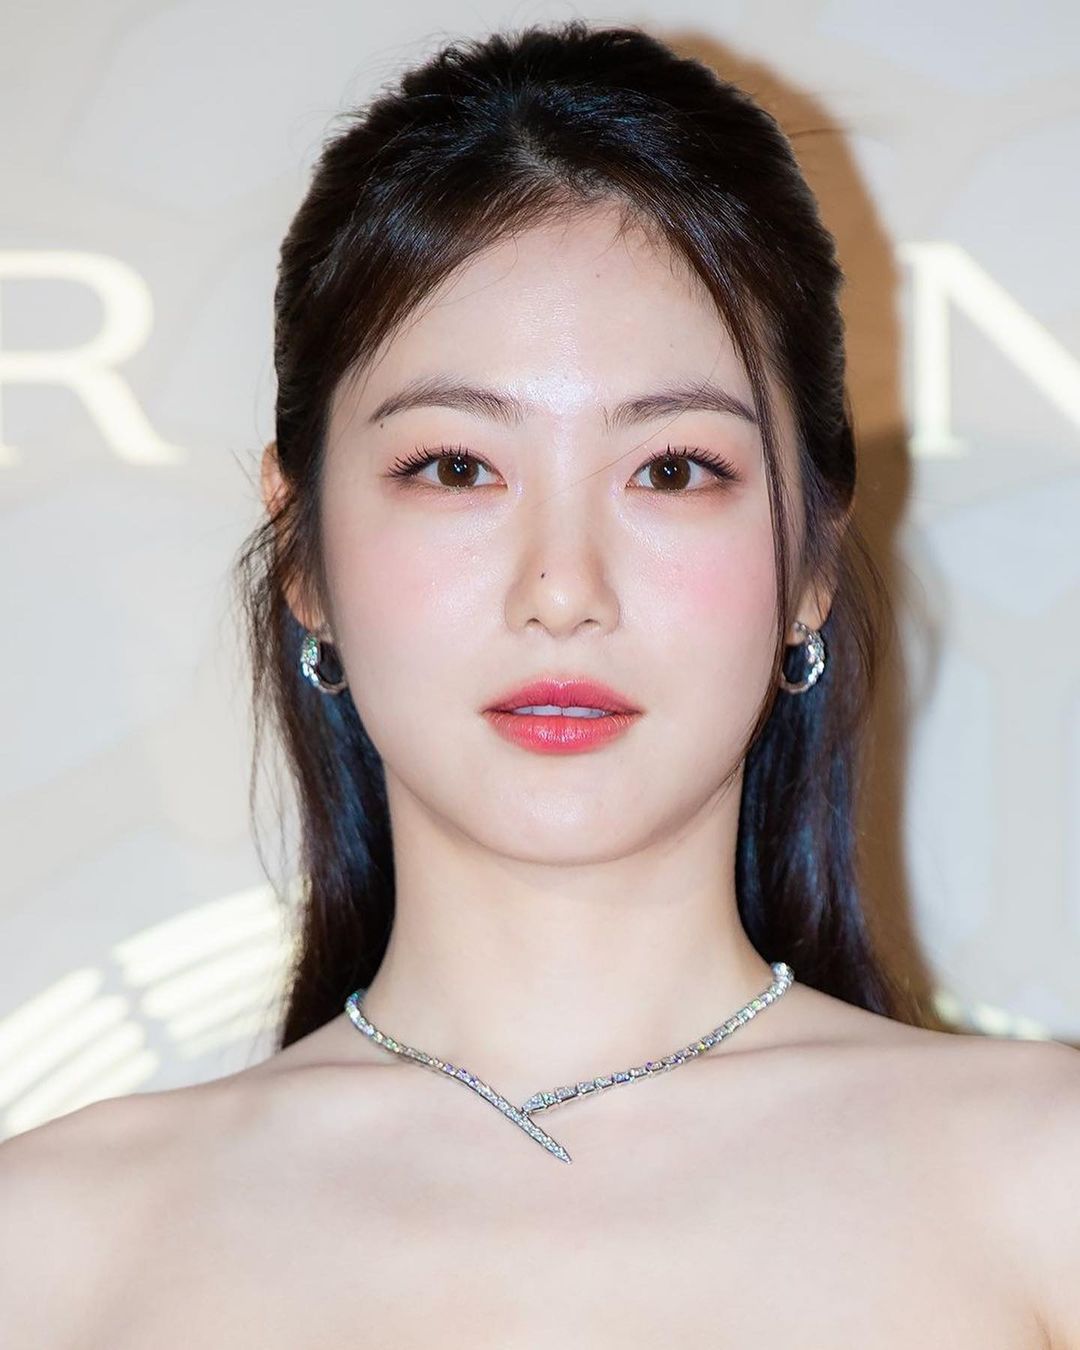 BLACKPINK's Lisa looks angel in white at BVLGARI's event in Seoul, Watch